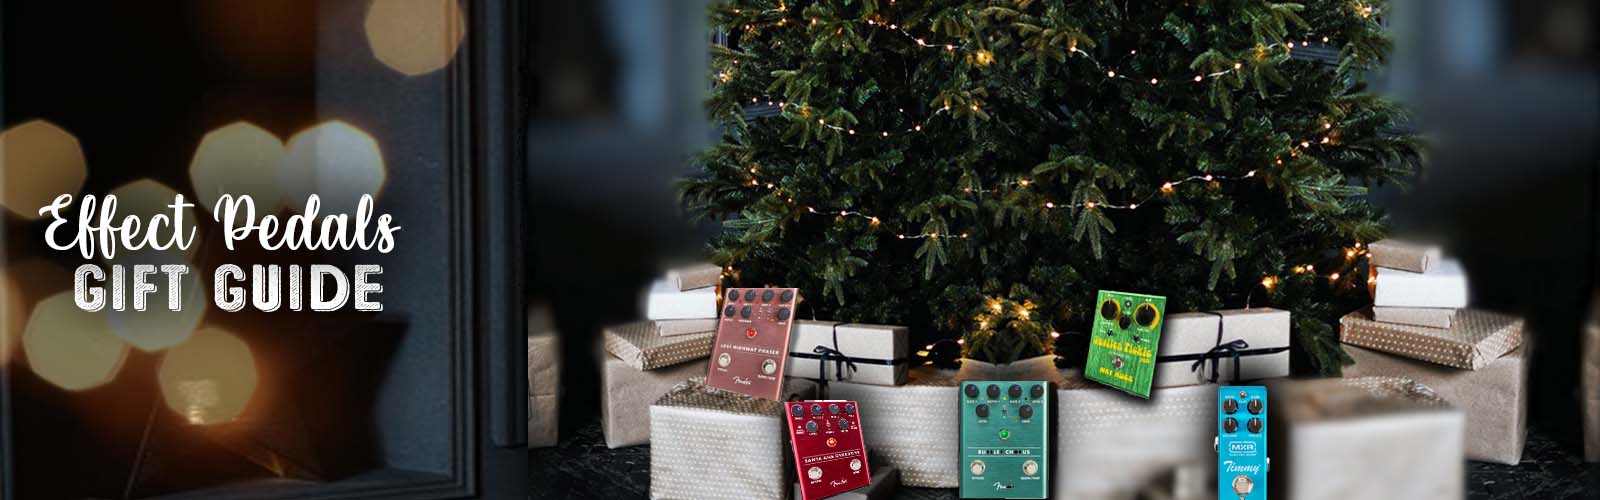 Effect Pedals Gift Guide Banner